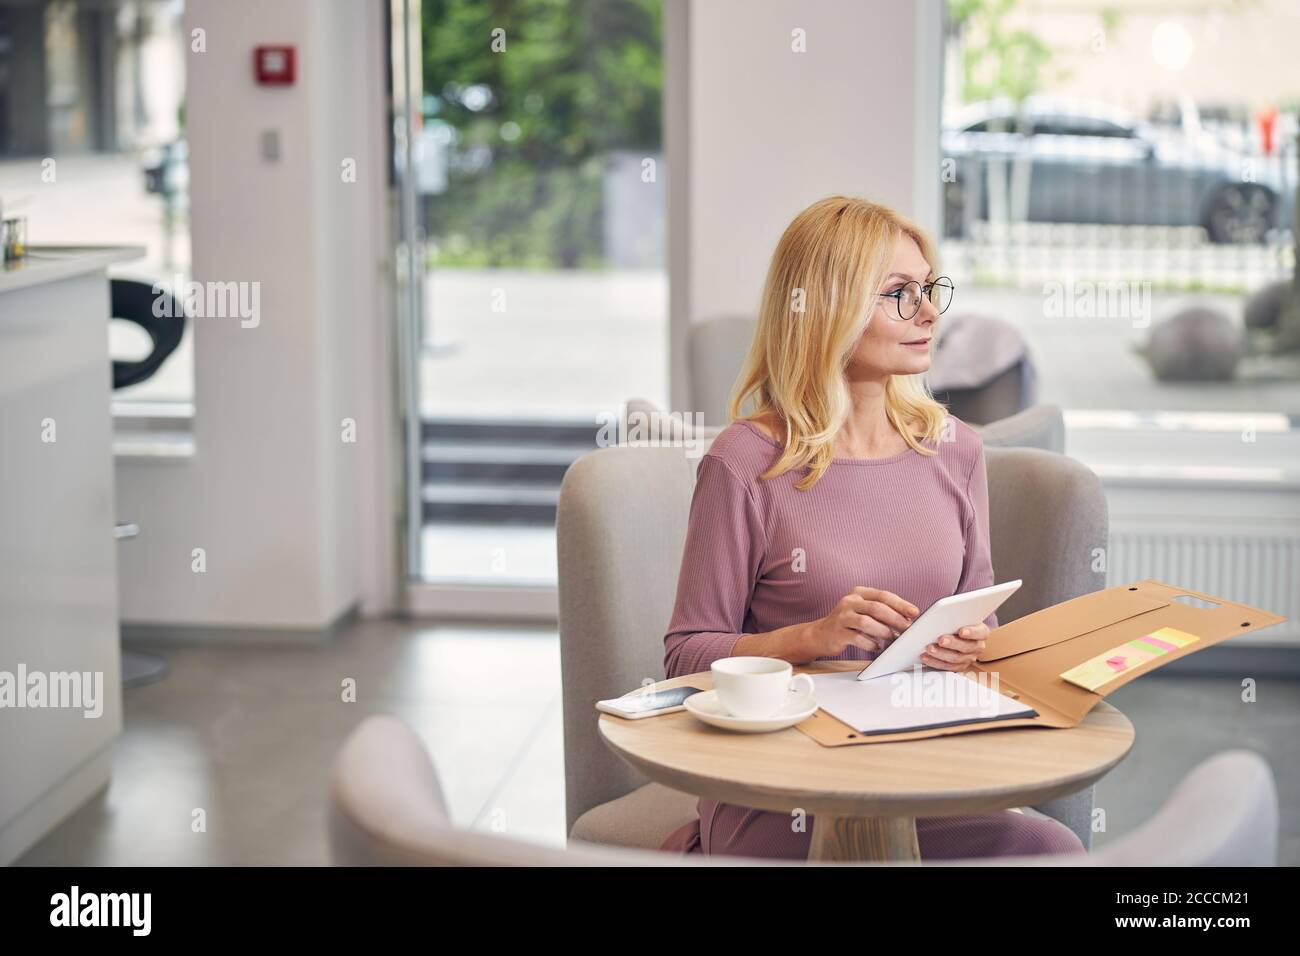 Pleased longhaired woman preparing for business meeting Stock Photo